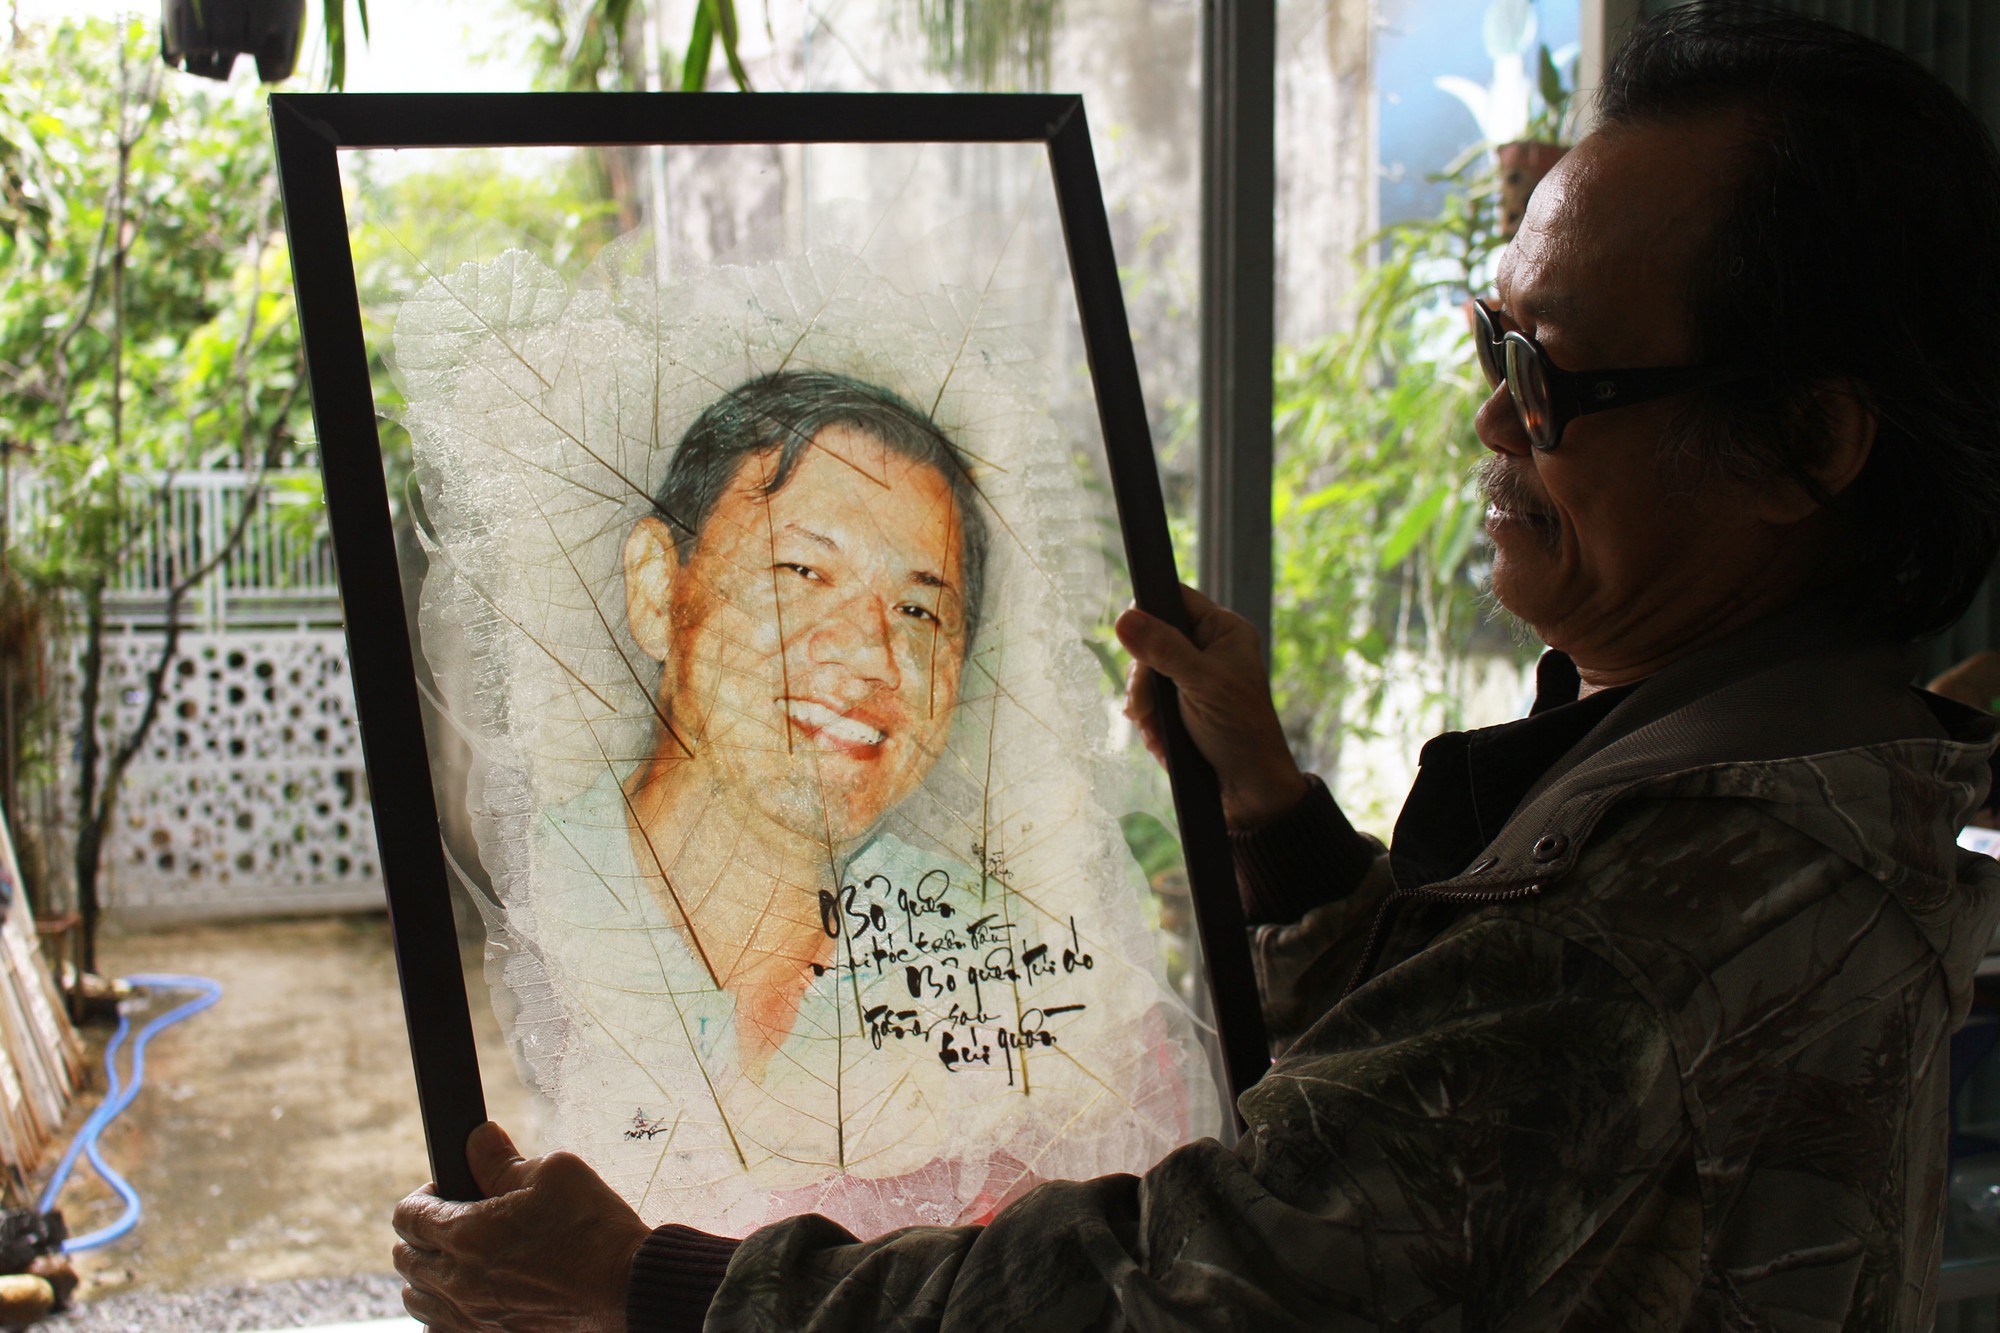 Le Nguyen Vy shows off one of his leaf artwork. Photo: Doan Nhan / Tuoi Tre